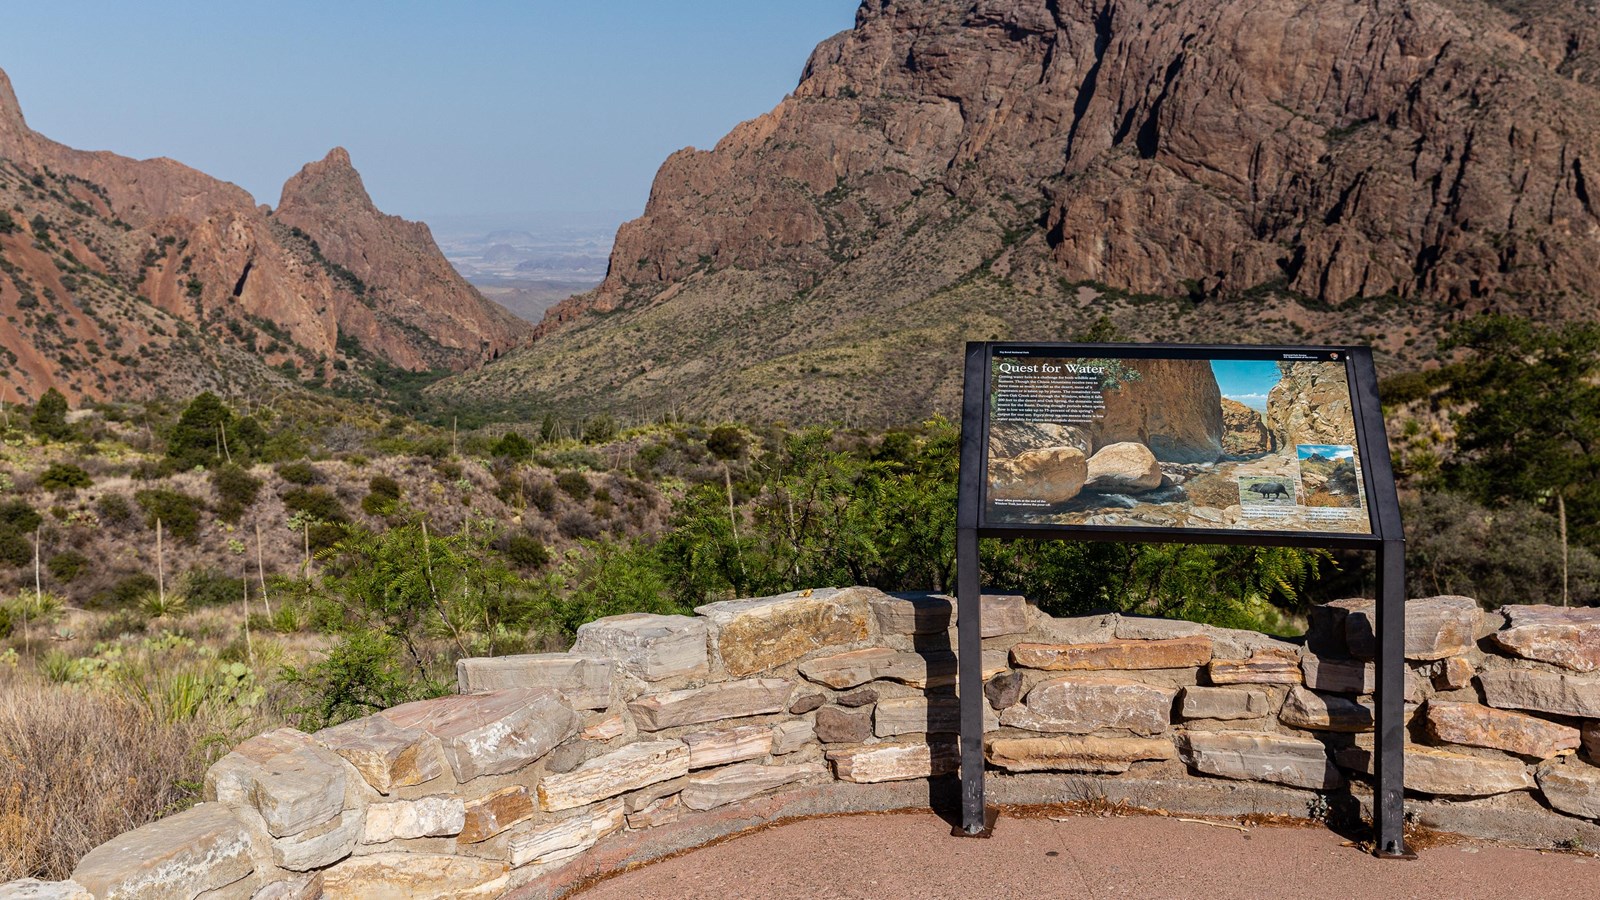 A paved trail and metal exhibit sign overlook a low basin surrounded by mountains.